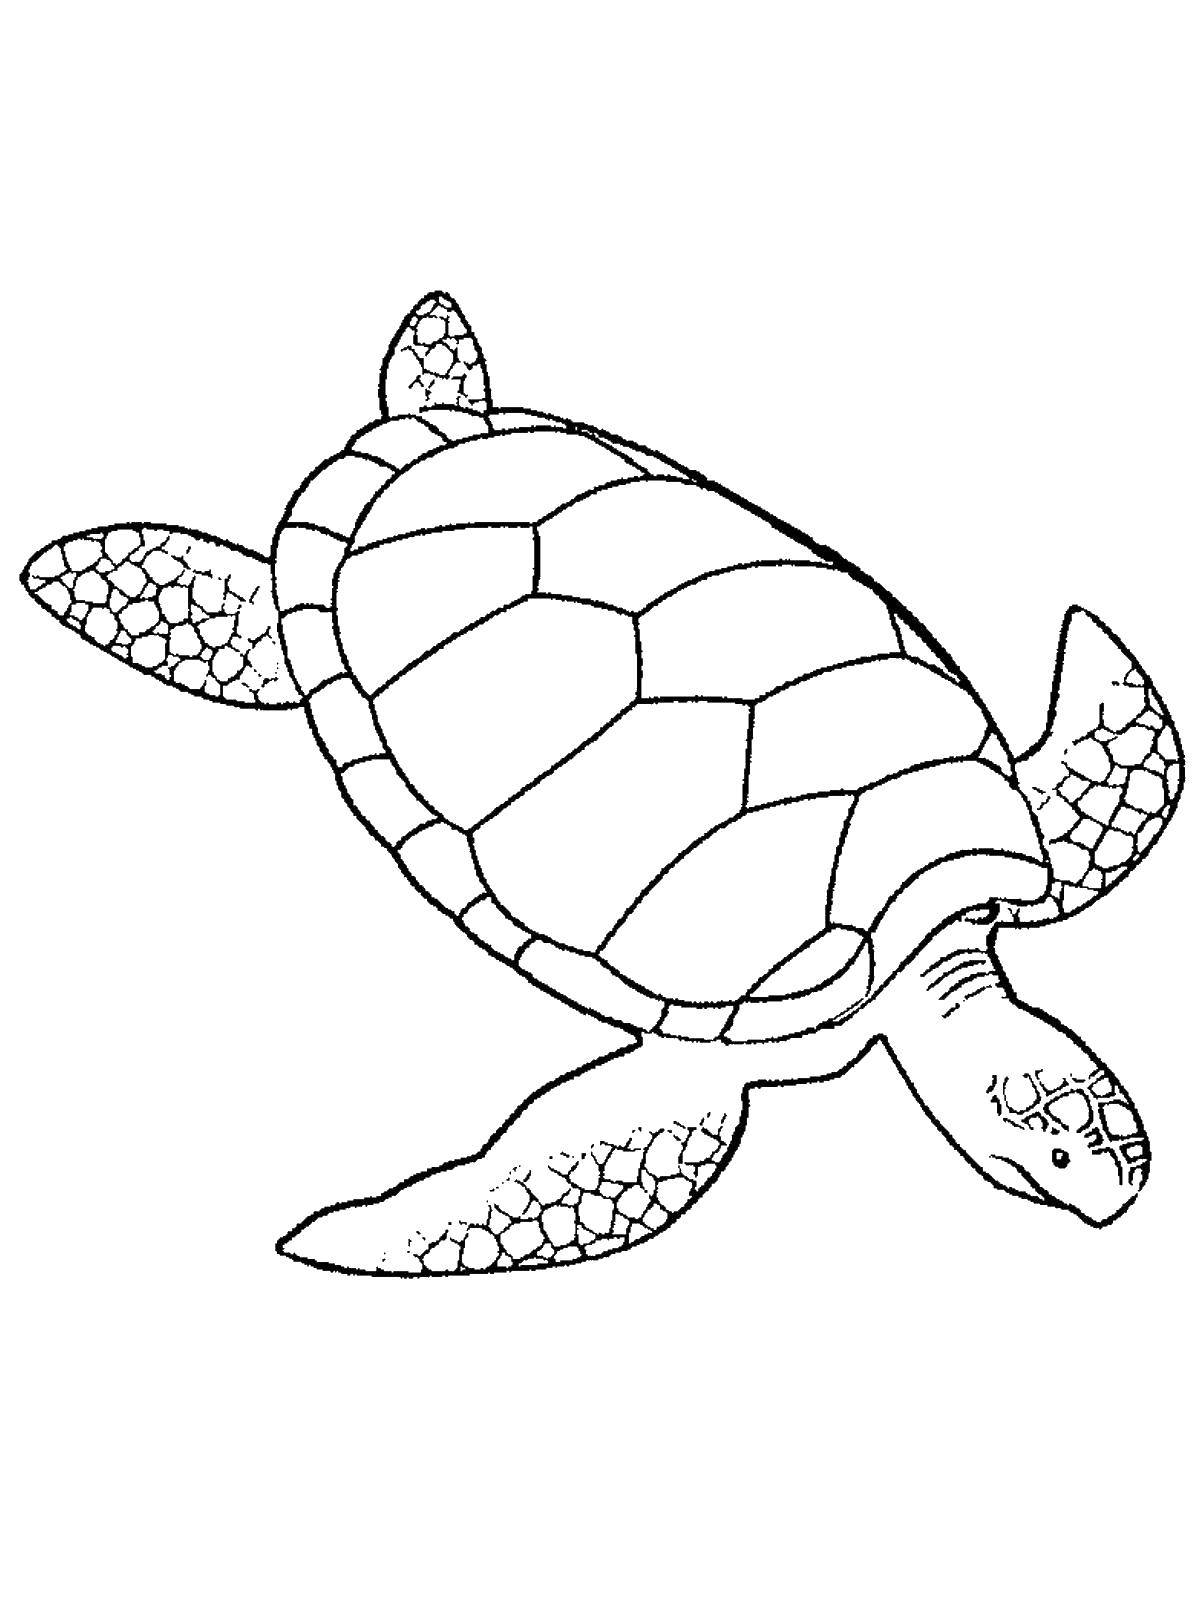 Coloring Turtle. Category marine. Tags:  Turtle.